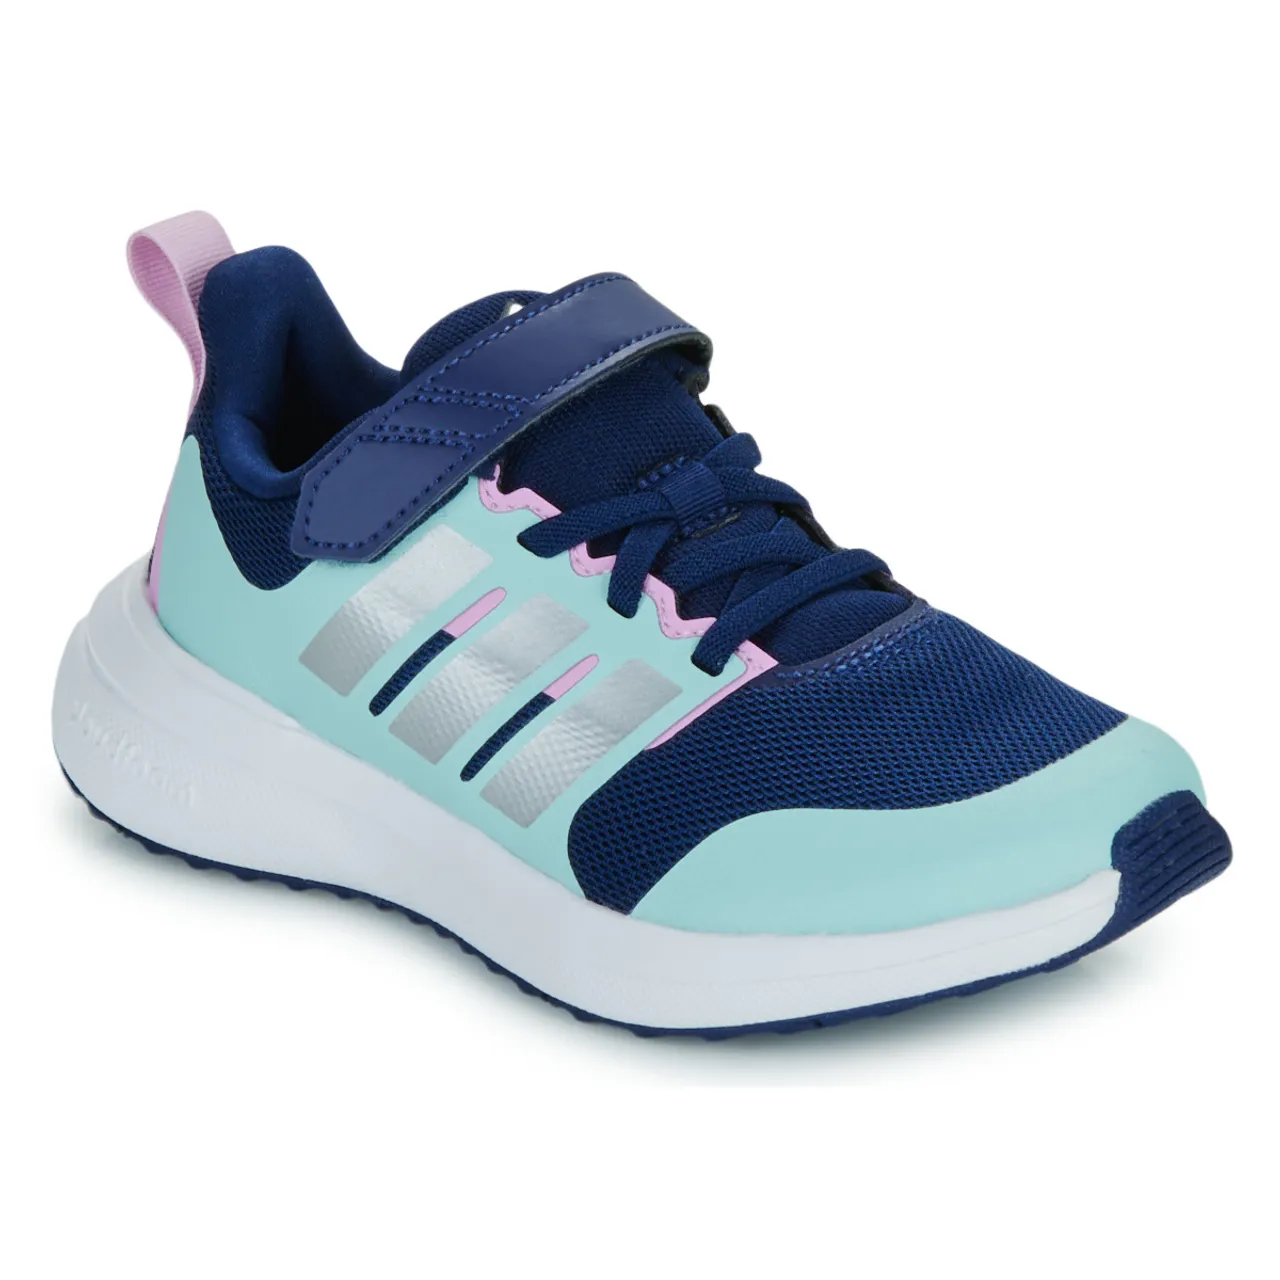 adidas  FortaRun 2.0 EL K  girls's Children's Shoes (Trainers) in Blue